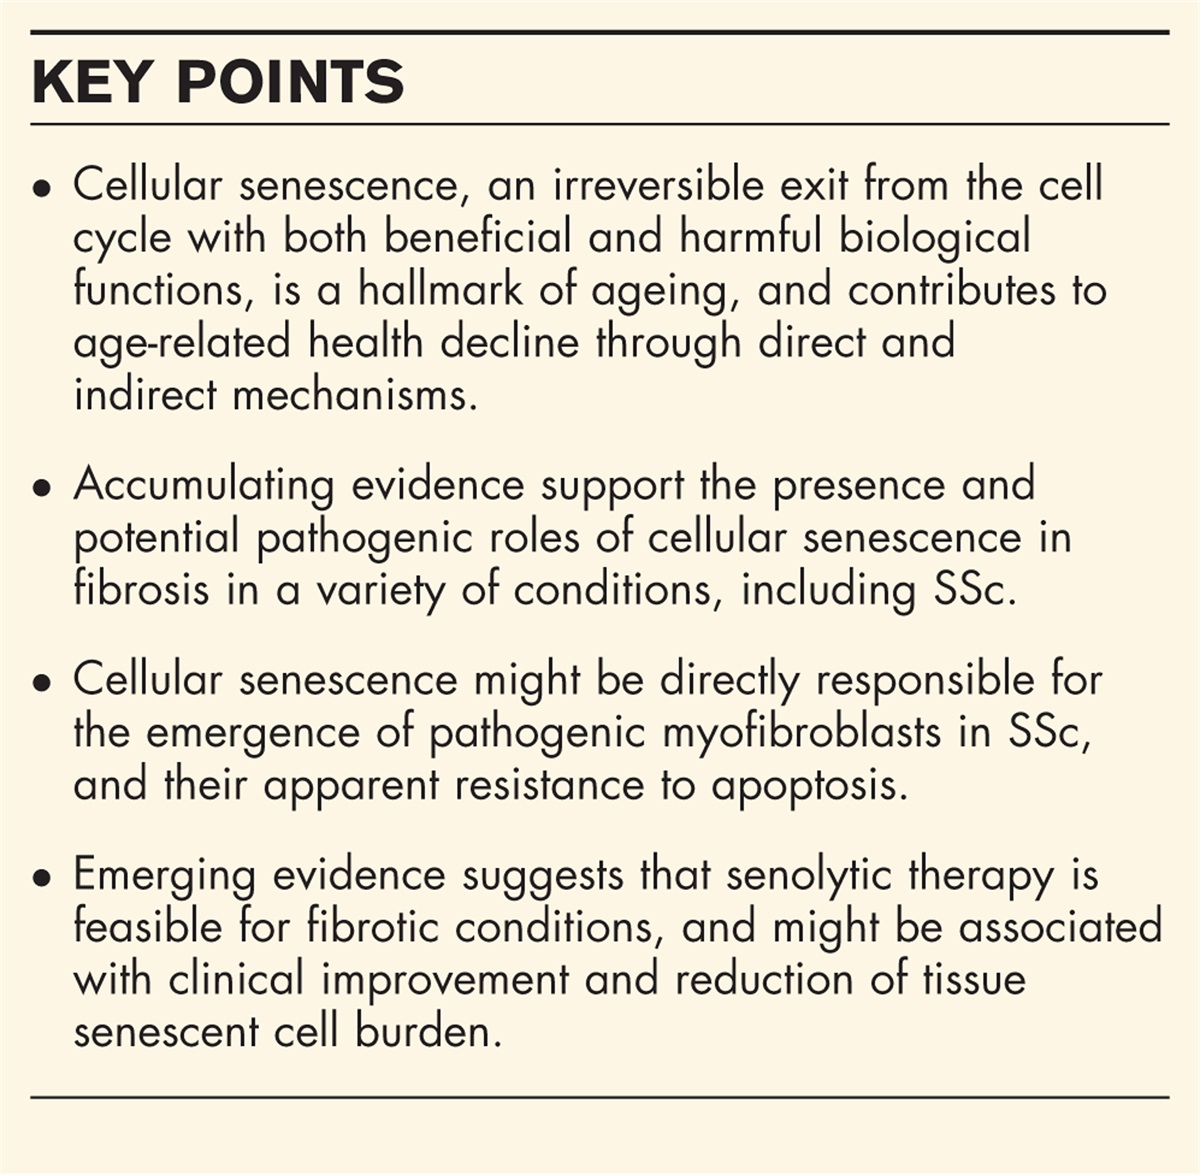 Role of cellular senescence in the pathogenesis of systemic sclerosis